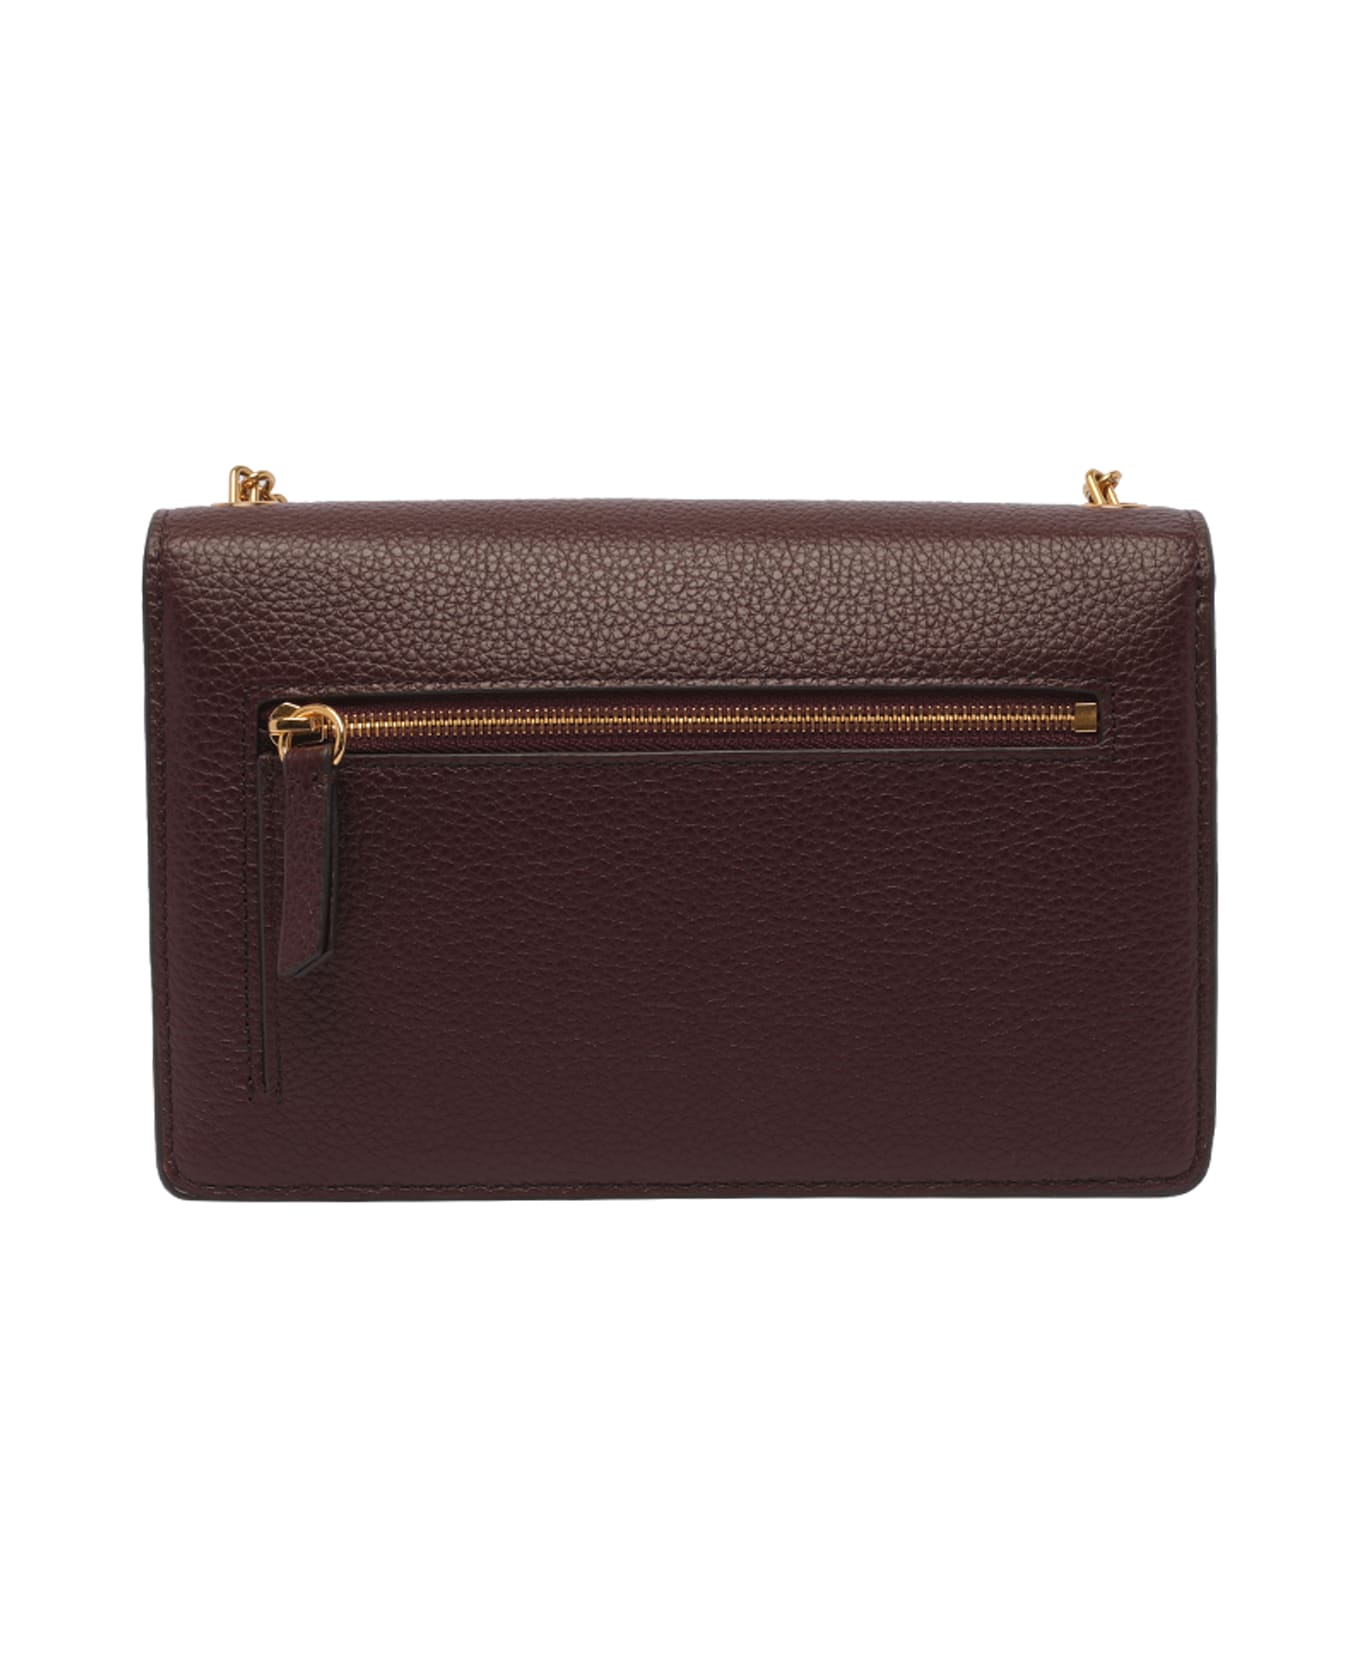 Mulberry Small Darley Classic Bag - Brown